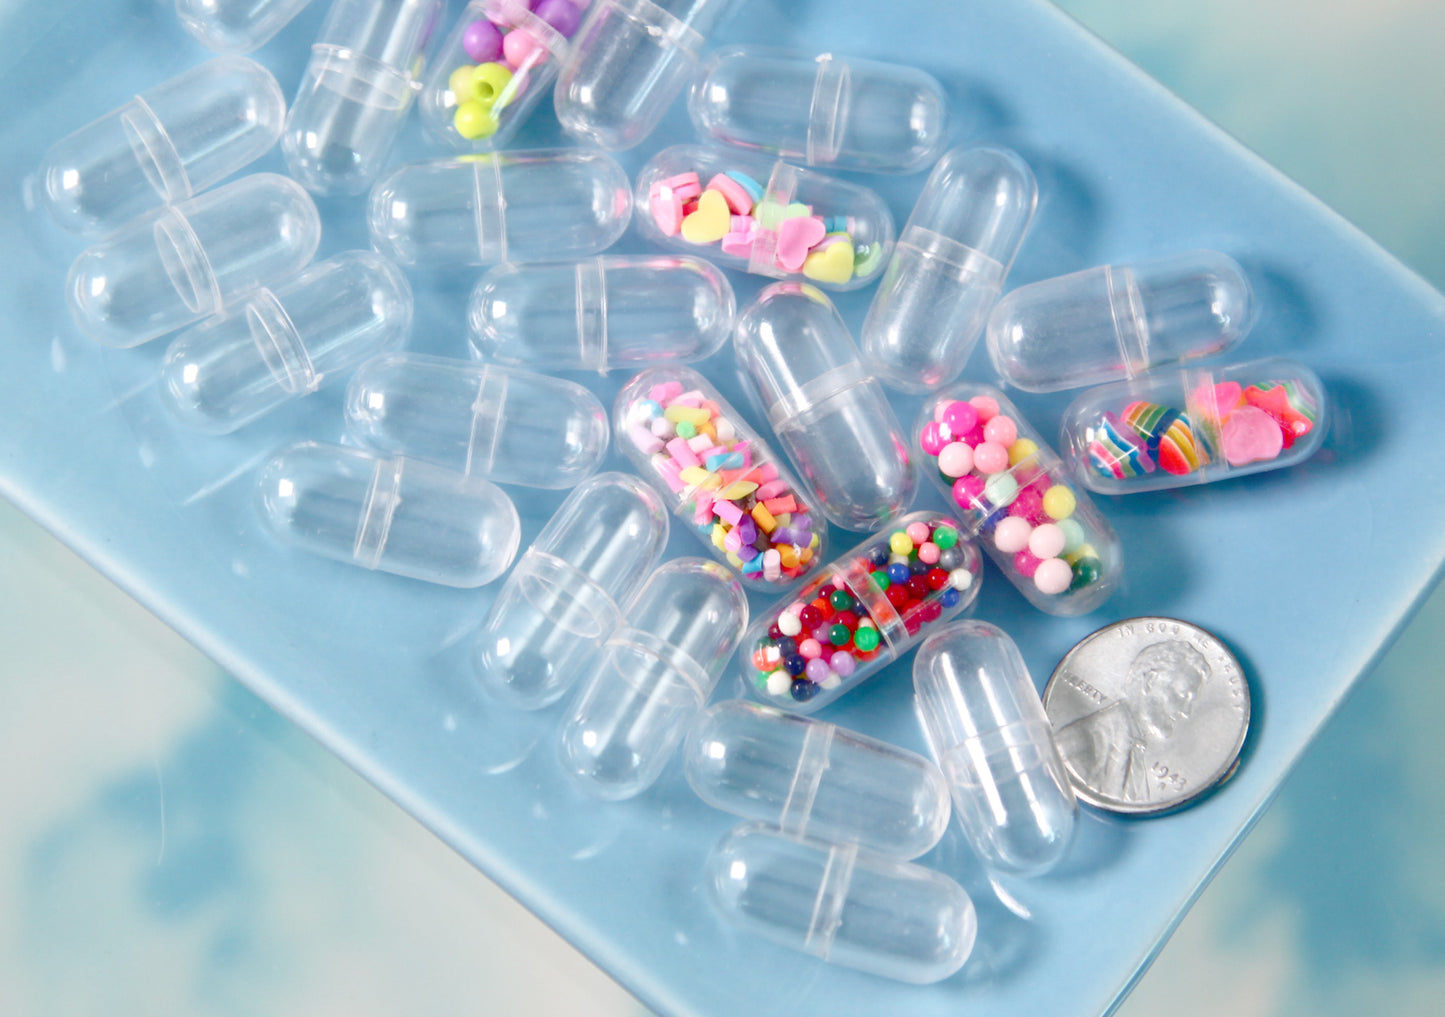 Mini Fillable Shaker Capsule - 24mm Tiny Clear Plastic Openable Blank Shaker Pill or Capsule, Fillable Hollow Blanks - 12 pc set